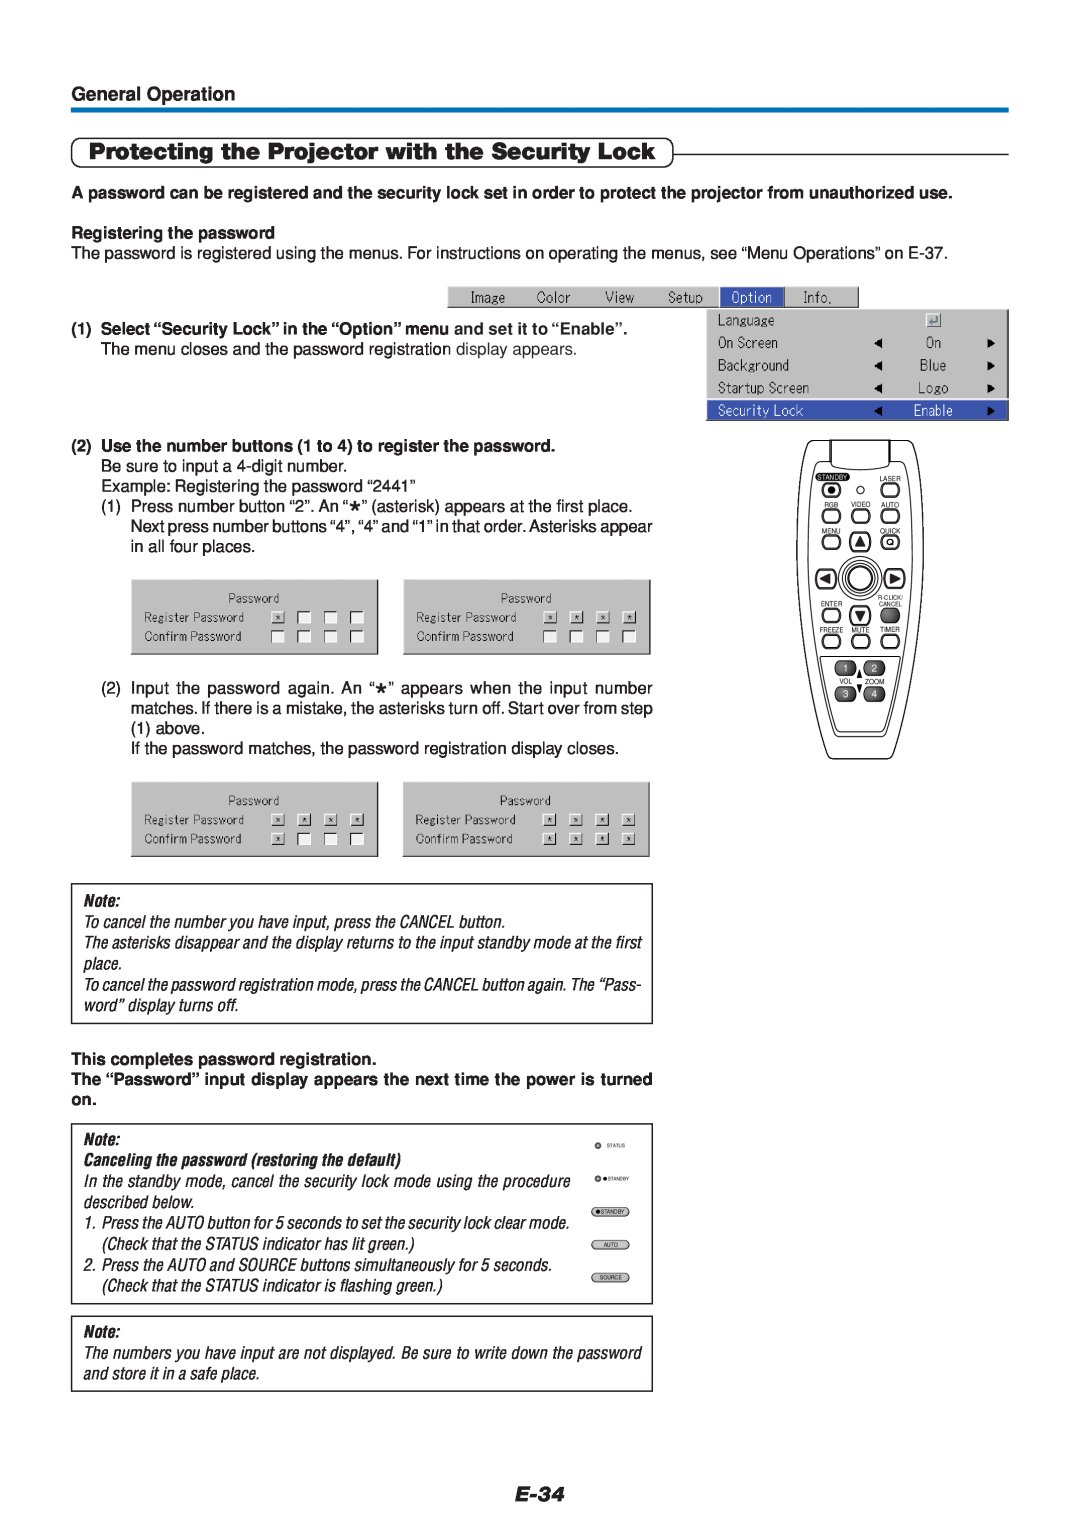 Mitsubishi Electronics DATA PROJECTOR user manual Protecting the Projector with the Security Lock, E-34, General Operation 